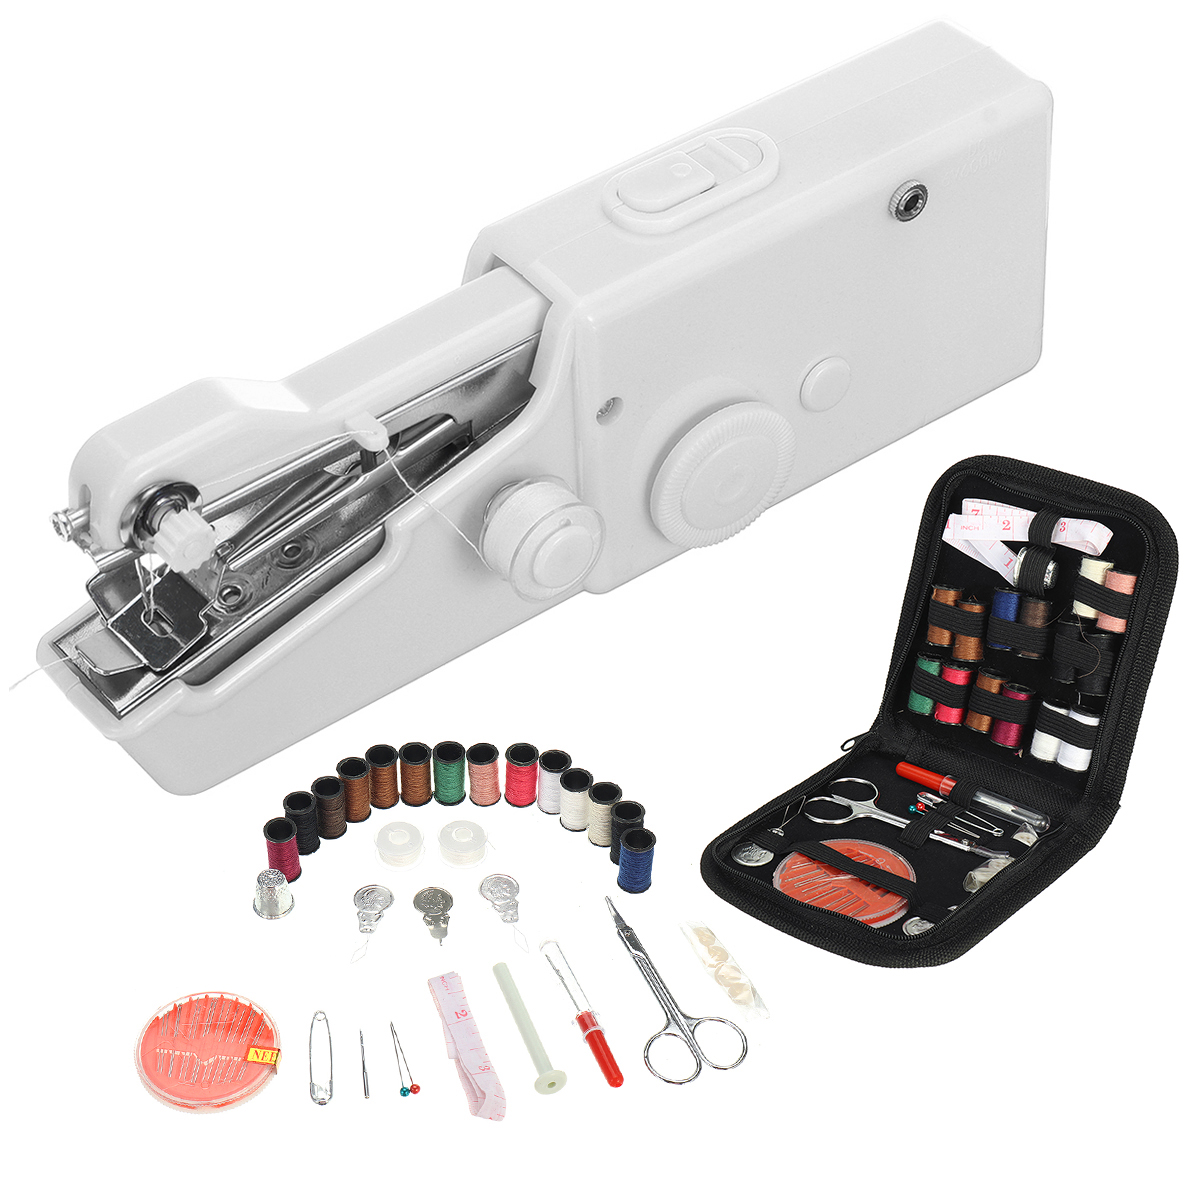 Without-Battery-Hand-held-Electric-Sewing-Set-PinkBlackWhite-Hand-held-Sewing-Machine-1890507-4